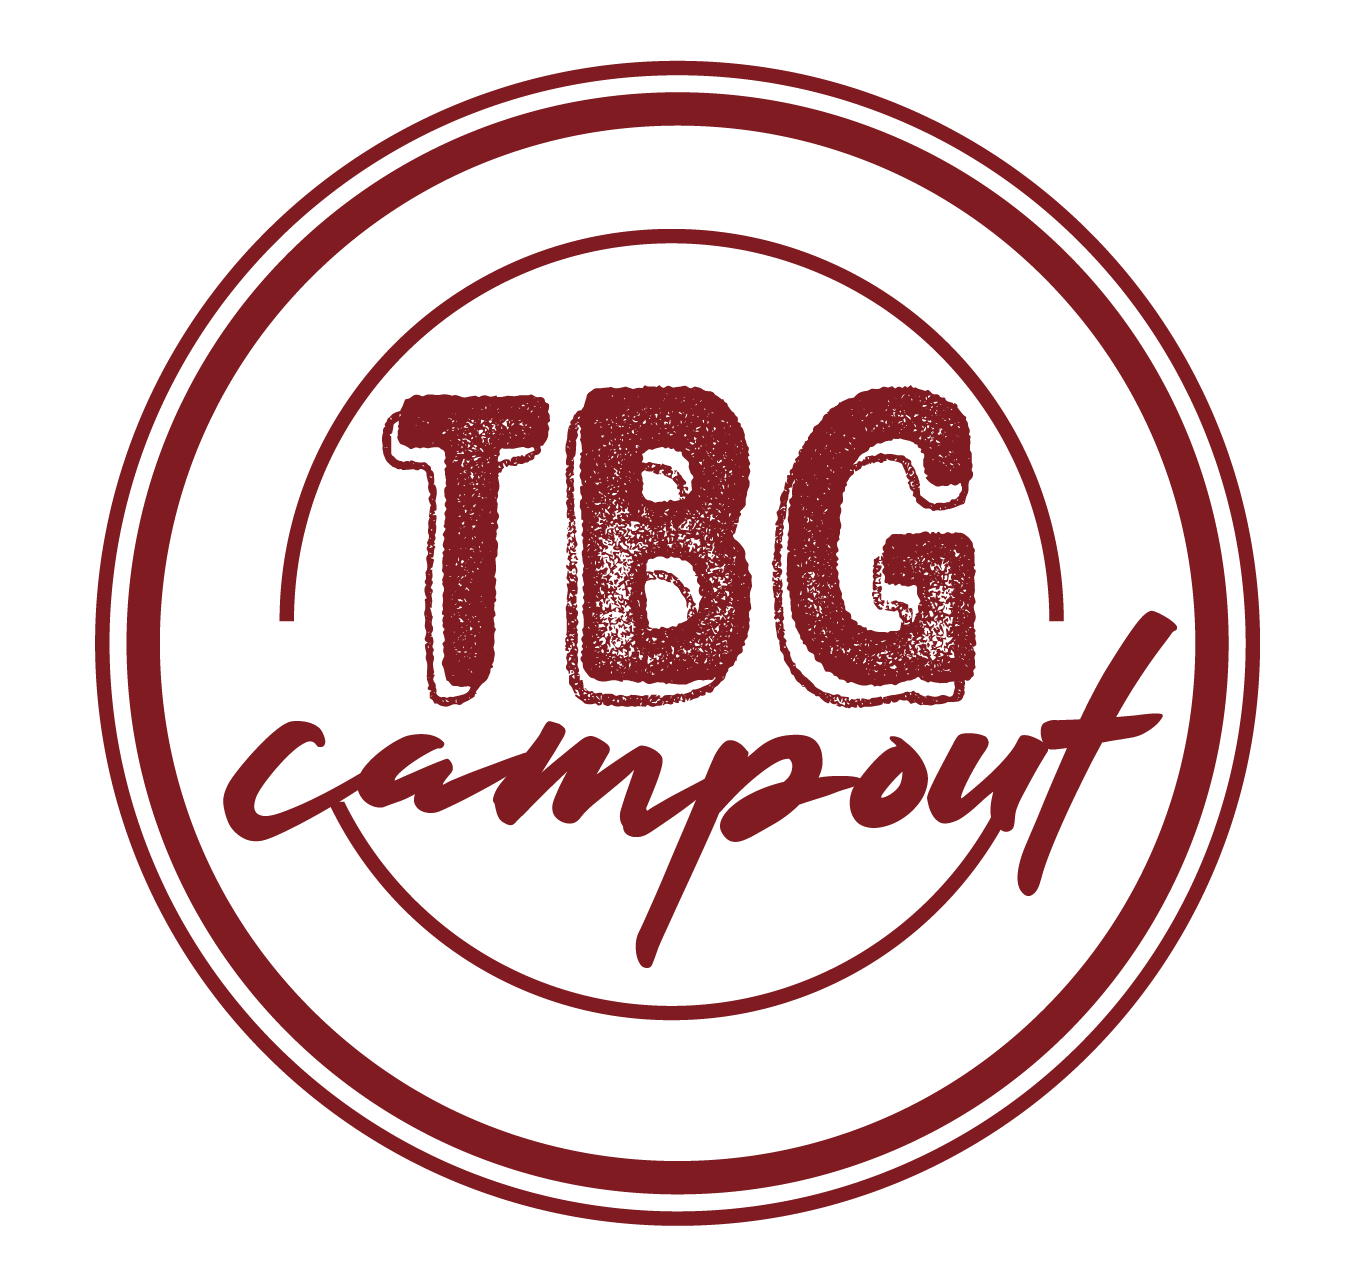 Circular icon with TBG Campout written inside